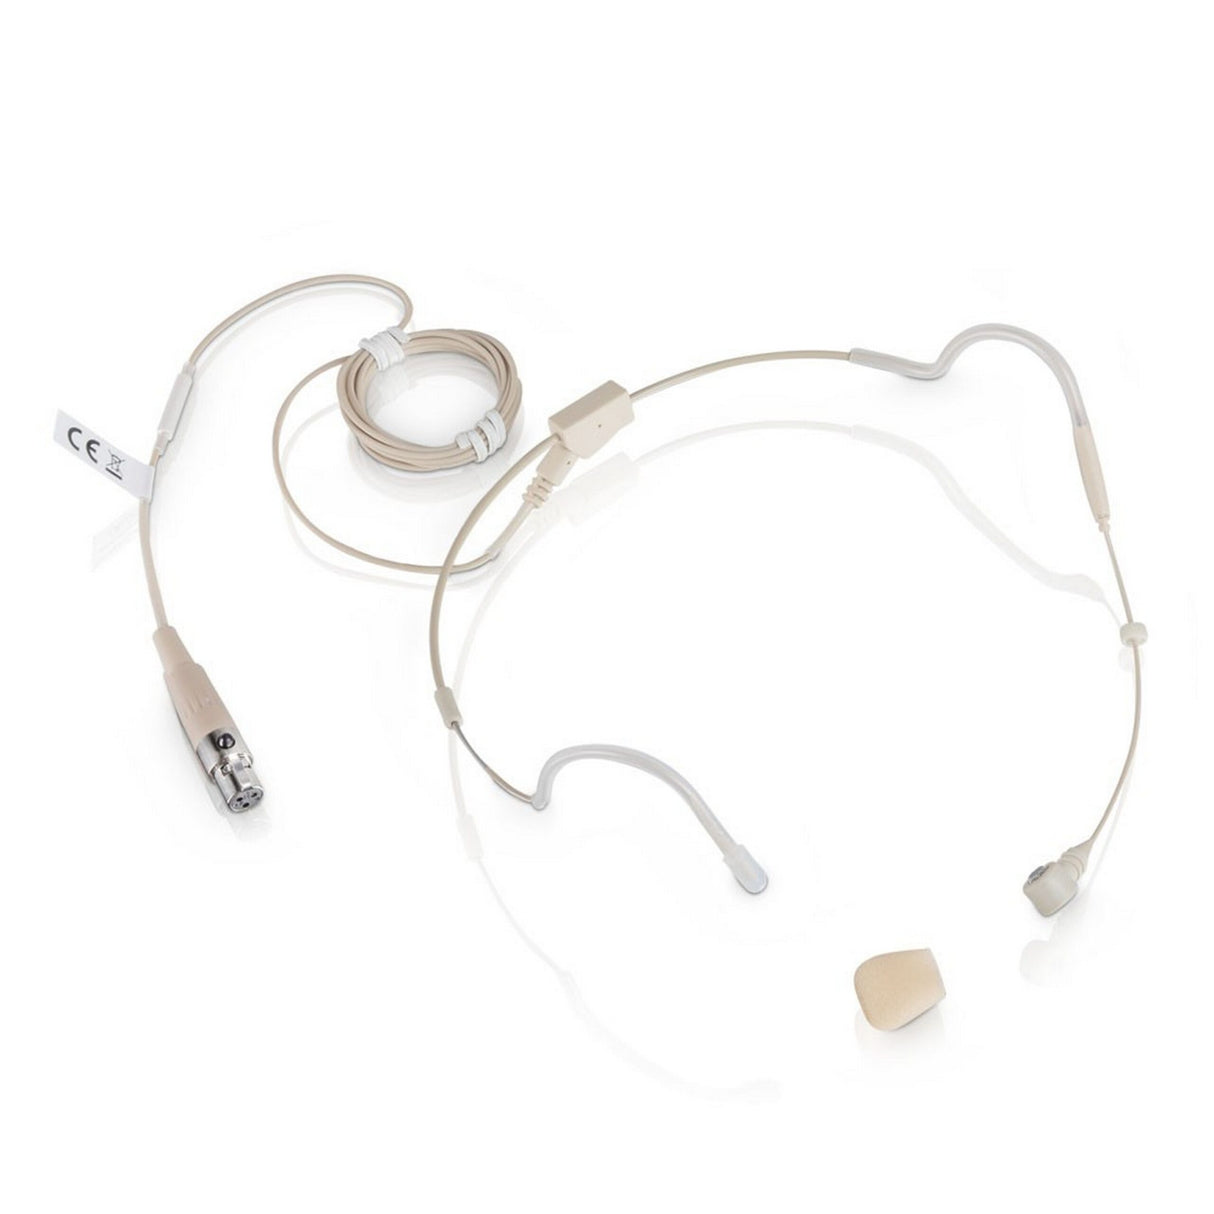 LD Systems WS 100 MH 3 BE Microphone Headset with 3-Pin Female Mini XLR Connector, Beige